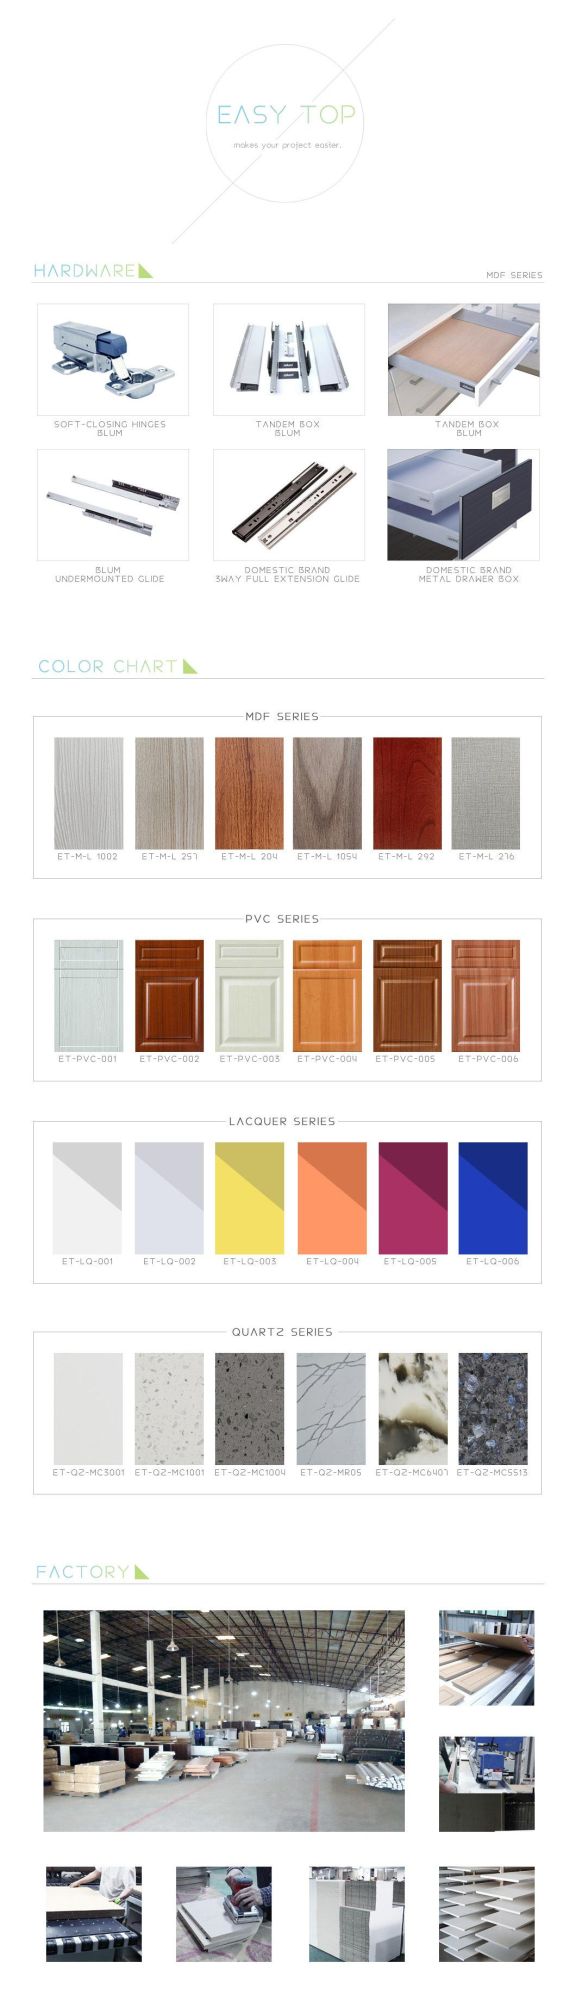 Cheap Price Philippines Furniture PVC Kitchen Cabinet for Project Use